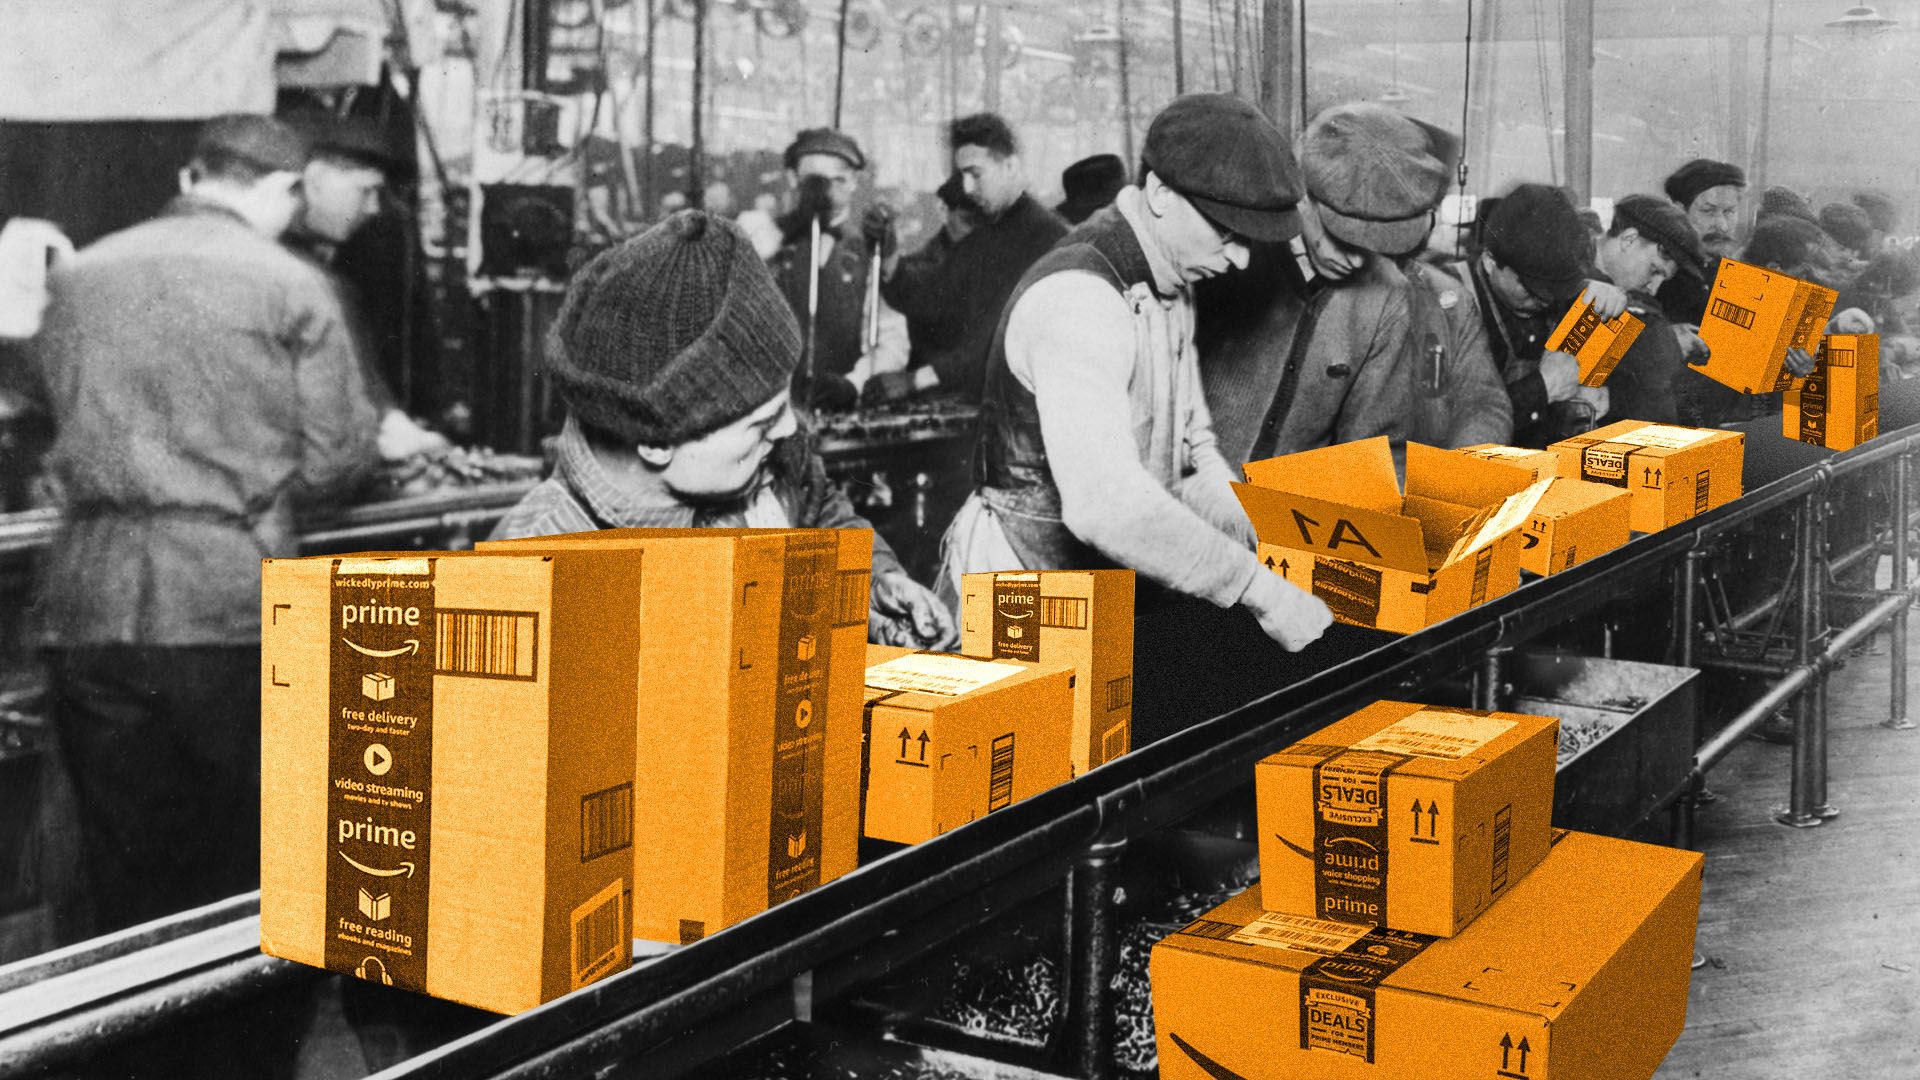 Illustration of turn-of-the-century factory workers processing Amazon packages